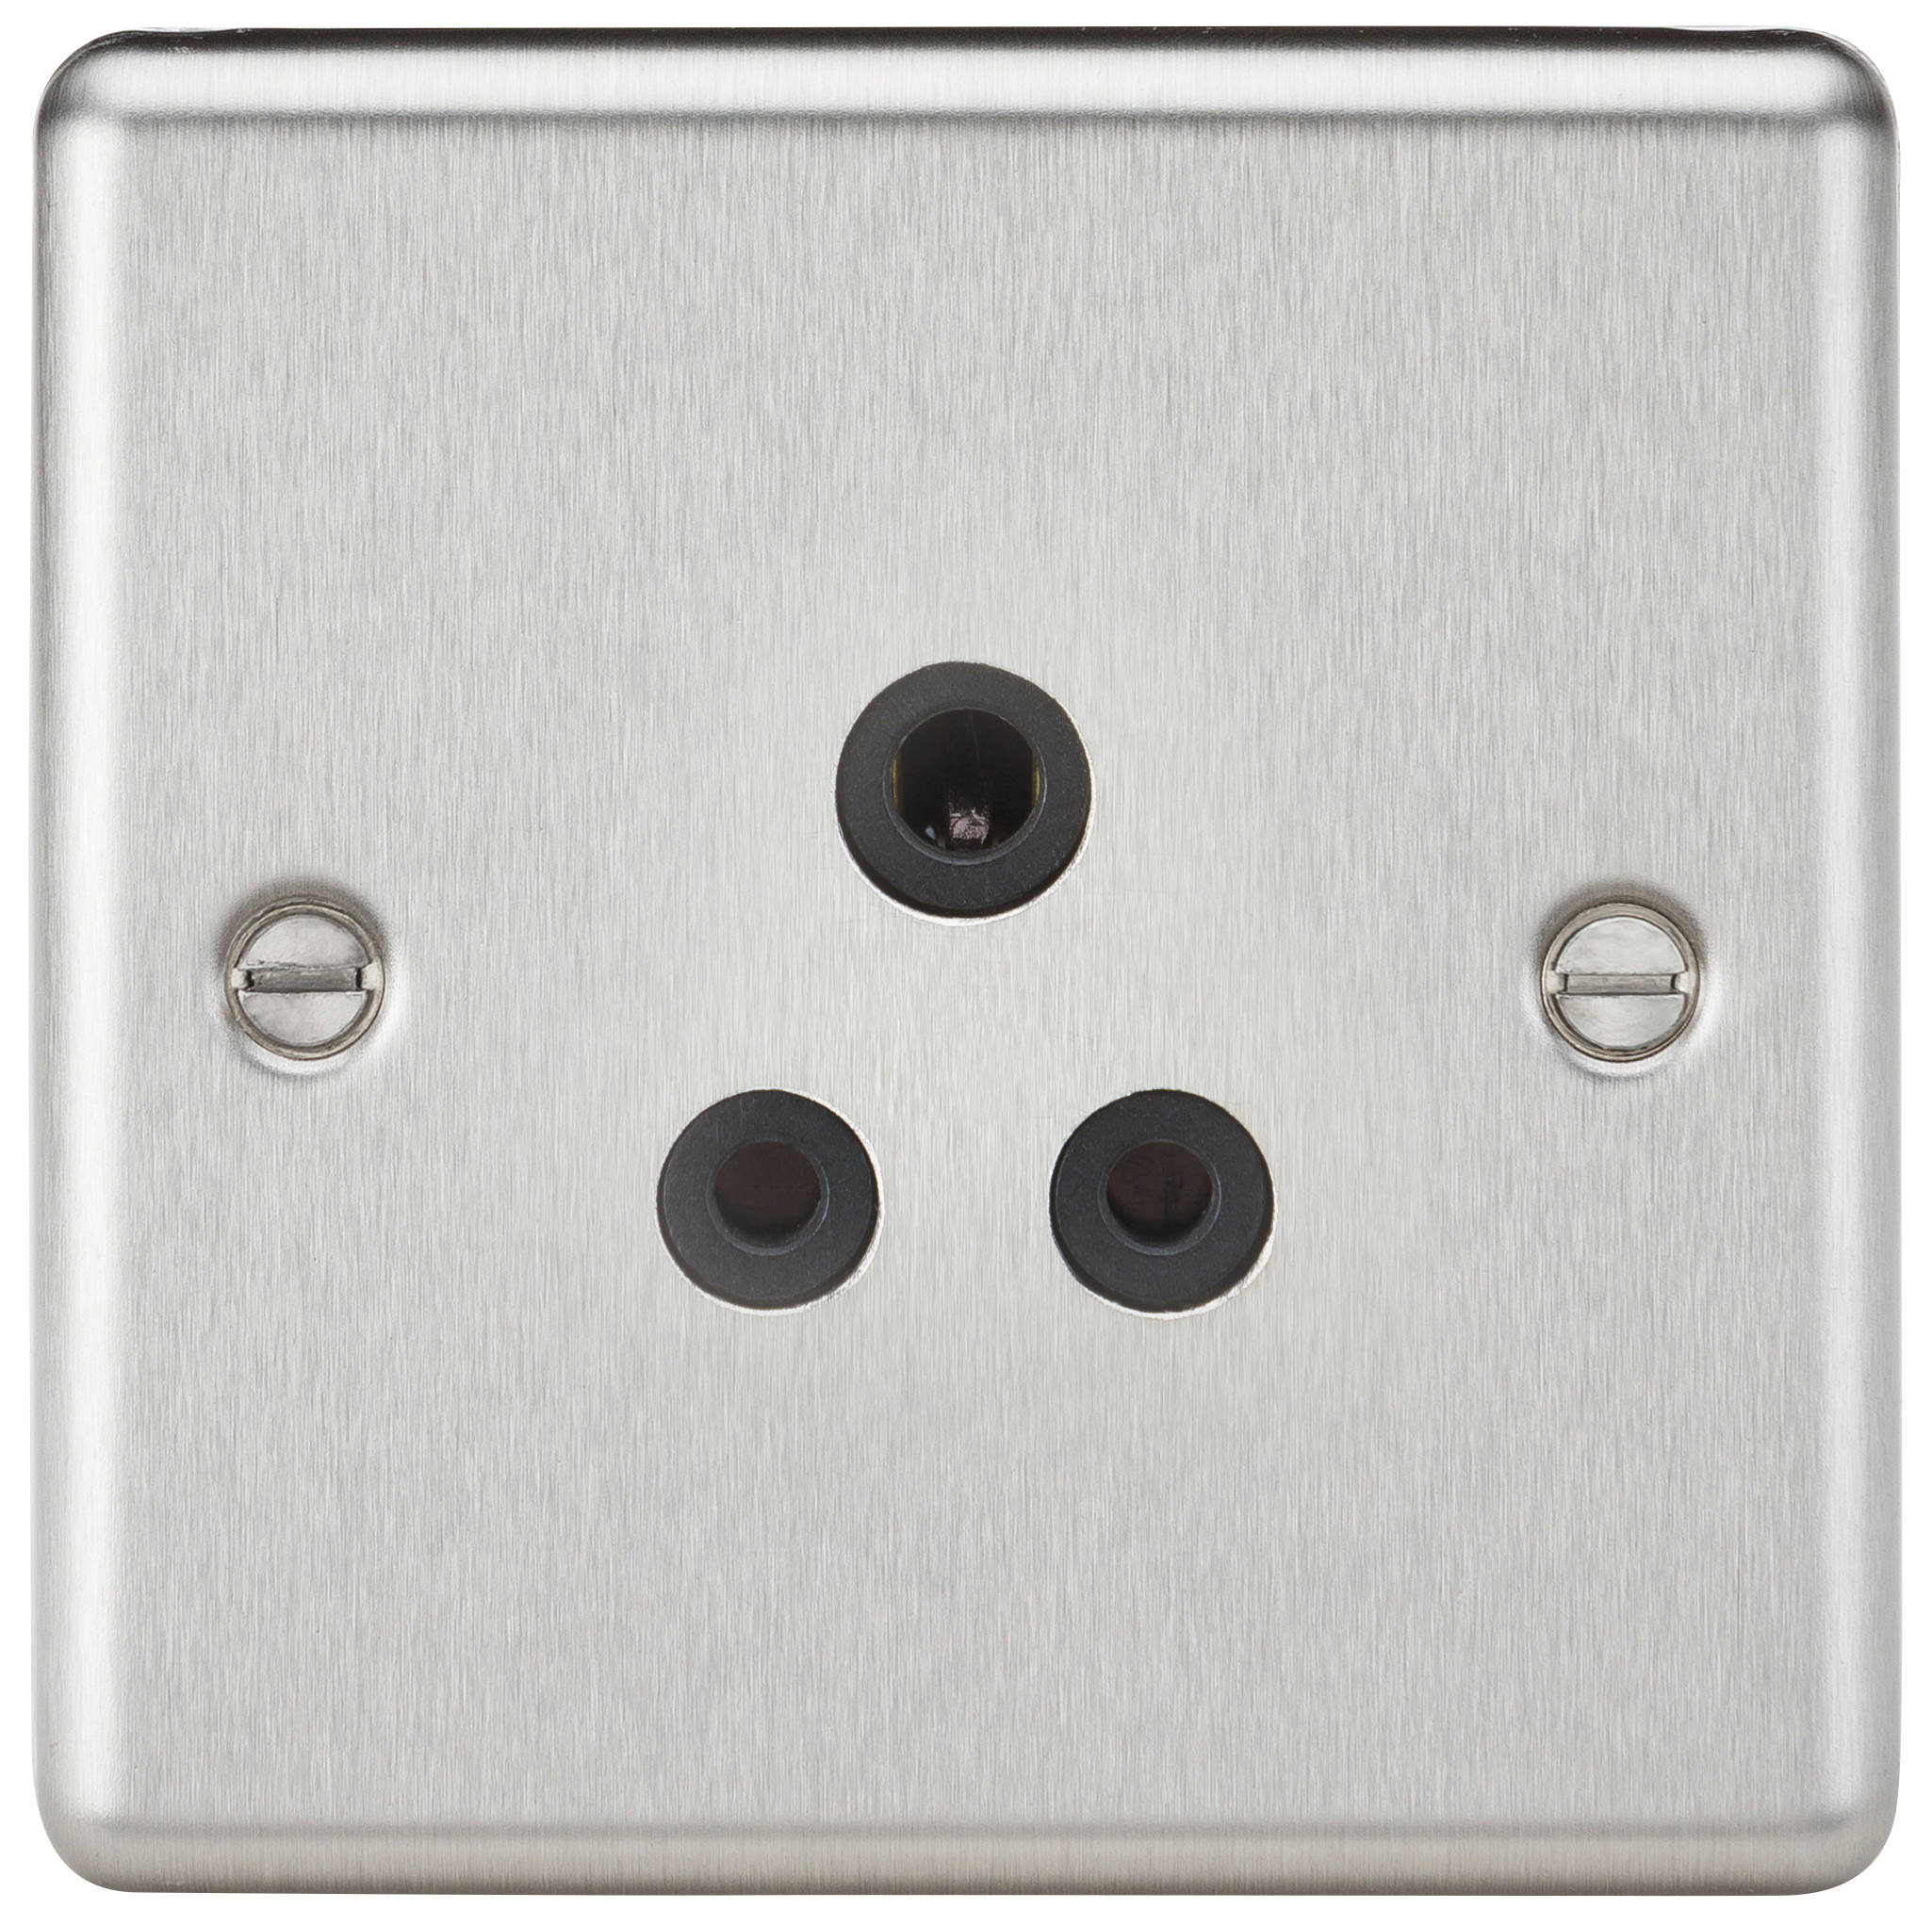 5A Unswitched Socket - Rounded Edge Brushed Chrome Finish With Black Insert - CL5ABC 